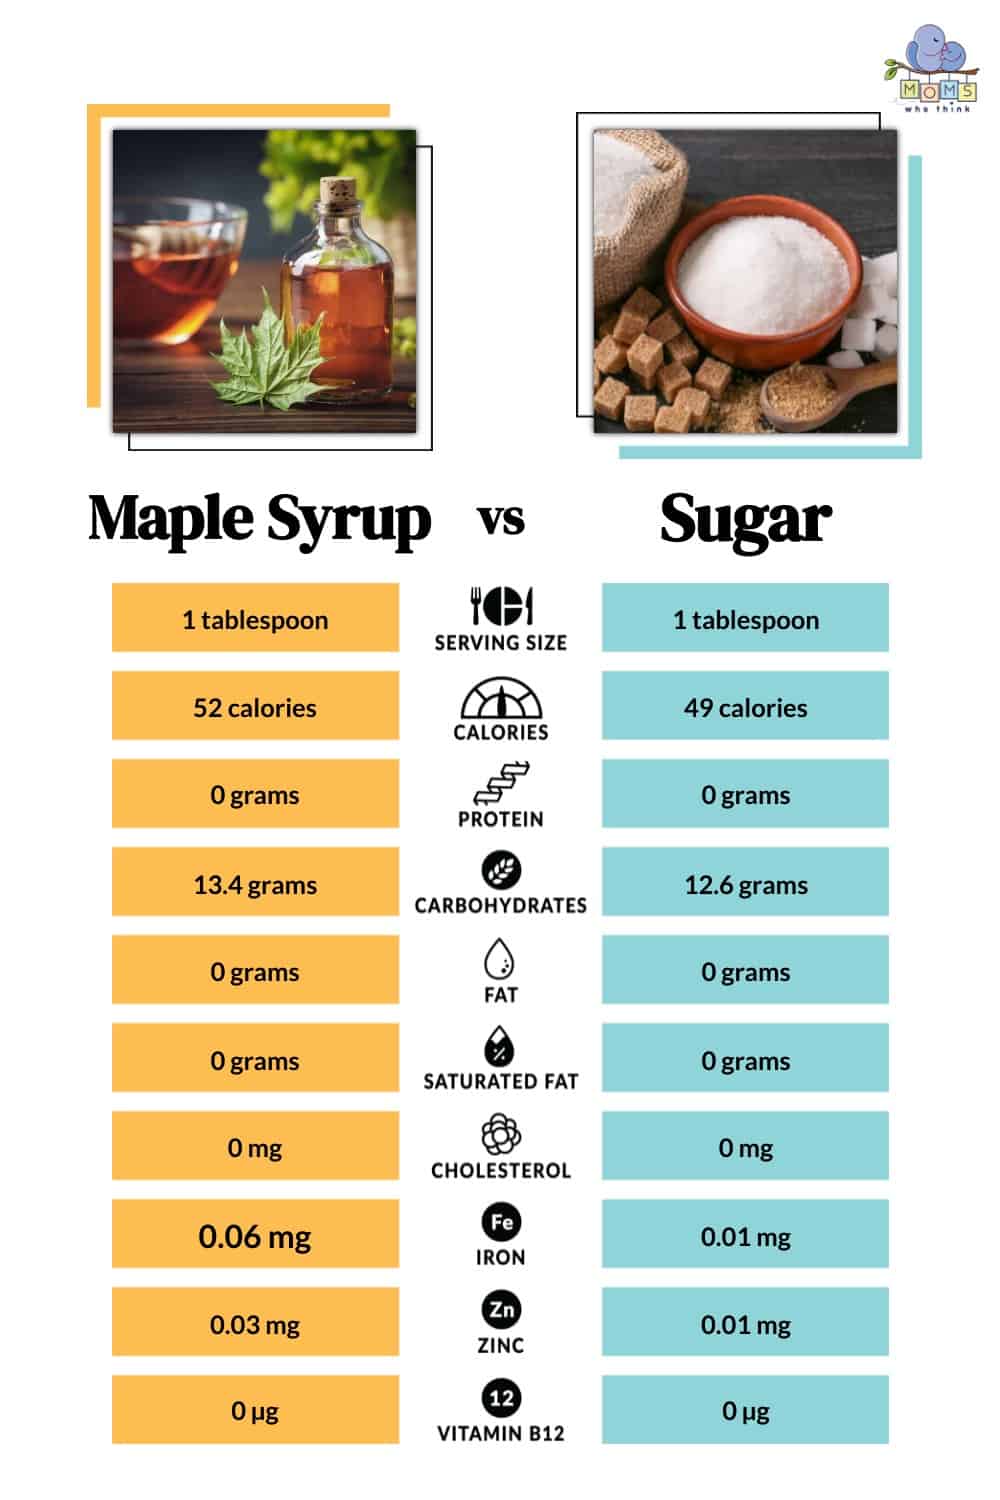 Maple Syrup vs Sugar Nutritional Facts